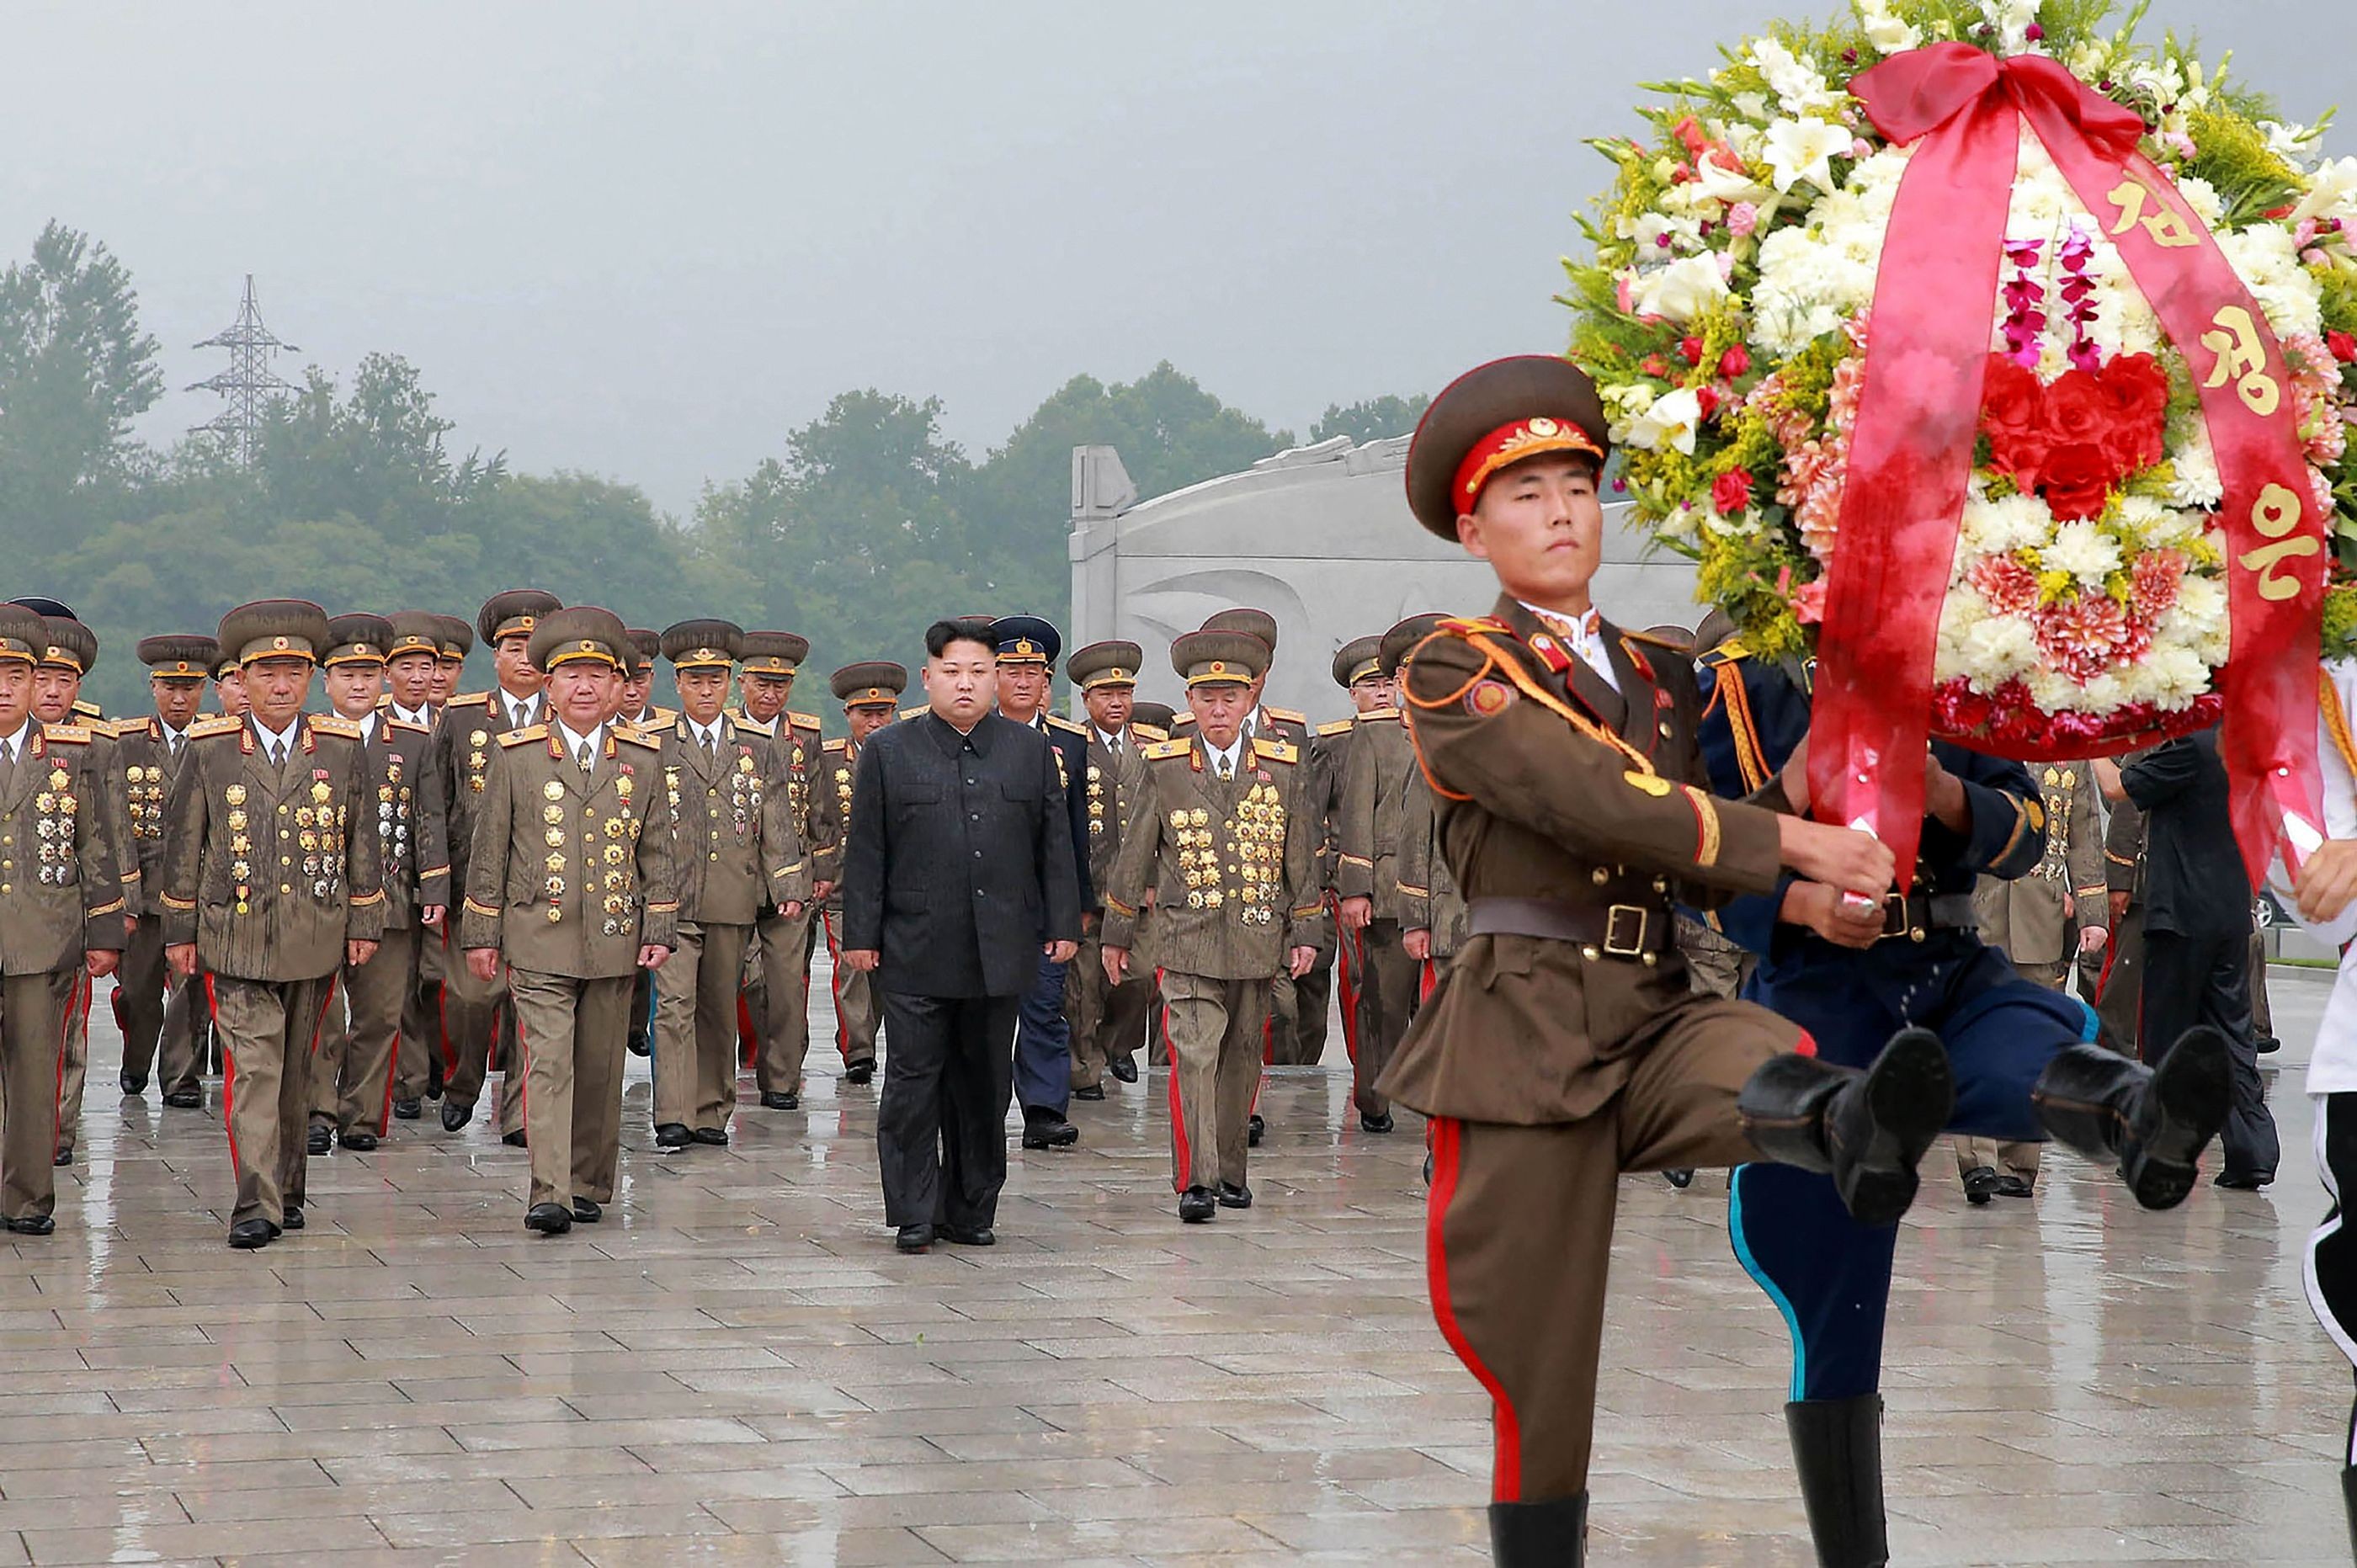 North Korean leader Kim Jong-un leads a memorial ceremony at the Fatherland Liberation War Martyrs Cemetery in Pyongyang on July 27, the 64th anniversary of the Korean War armistice agreement. Photo: AFP/KCNA via KNS